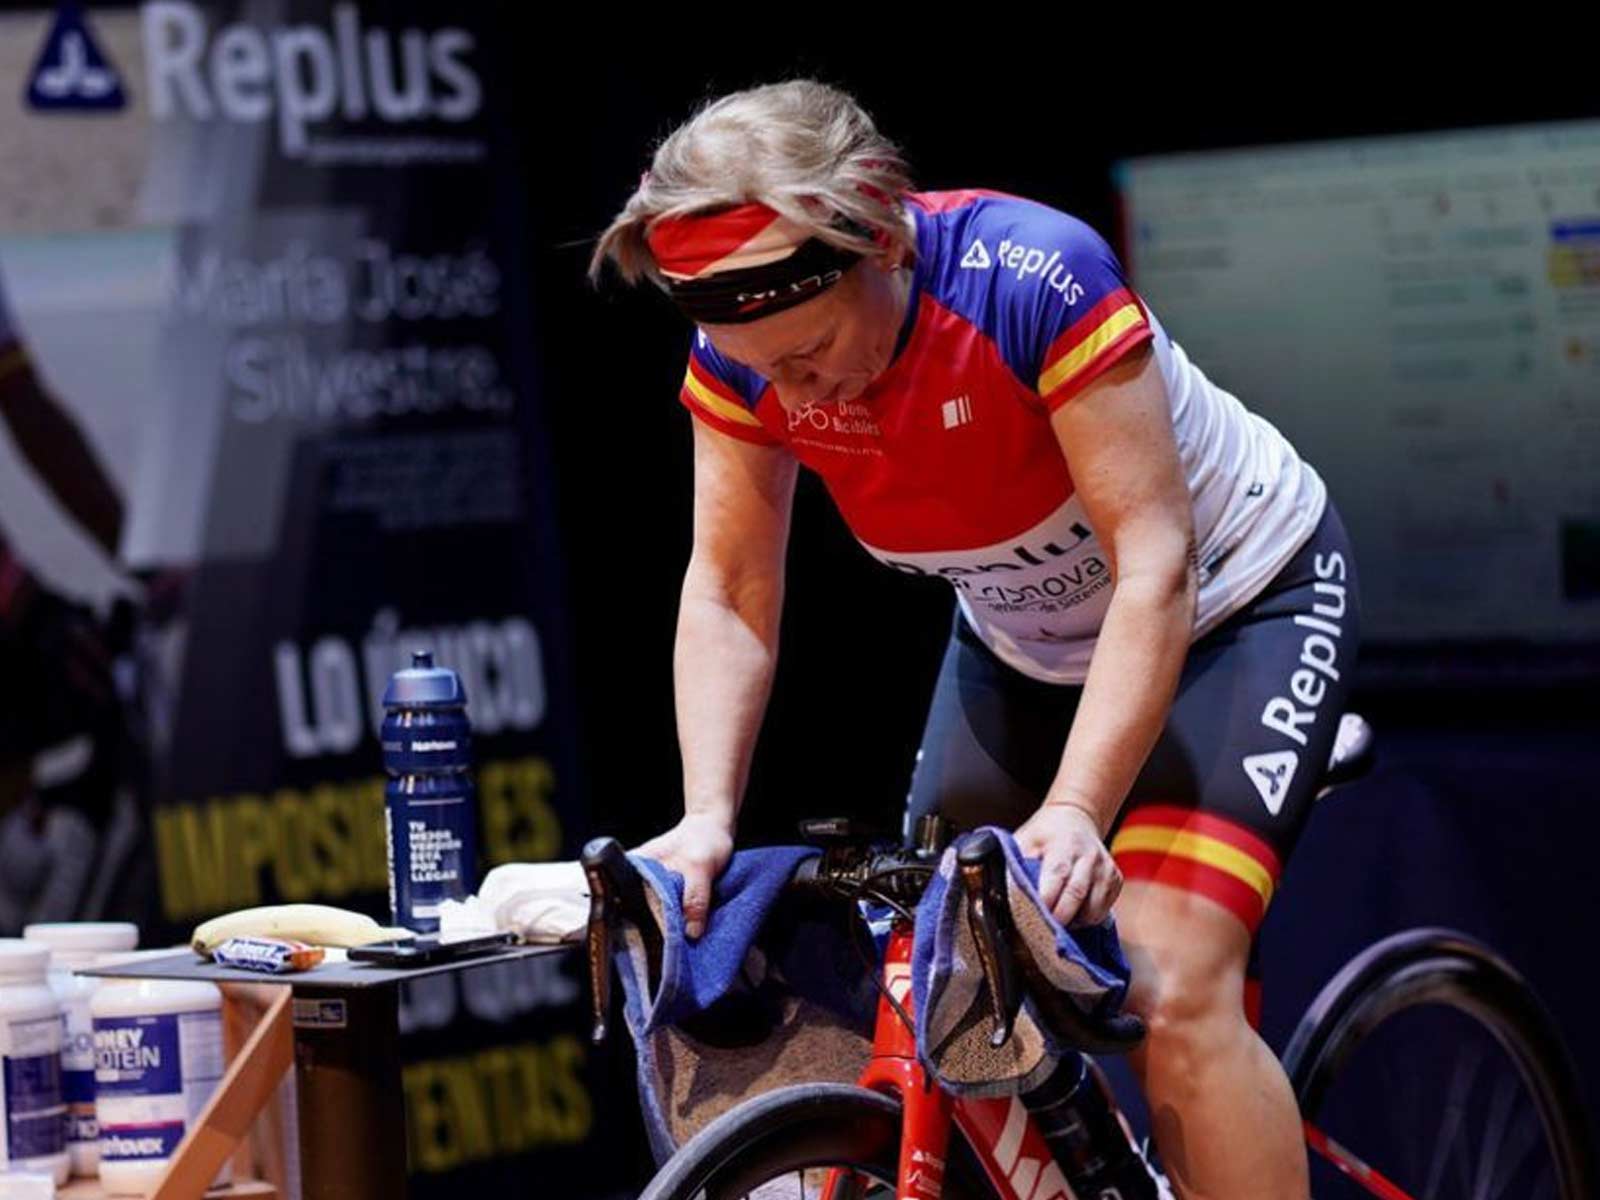 MARÍA JOSÉ SILVESTRE GOES FROM WINNING THE 24 HOURS OF LE MANS TO THE 24-HOUR WORLD CUP ON A CYCLING TRAINER.